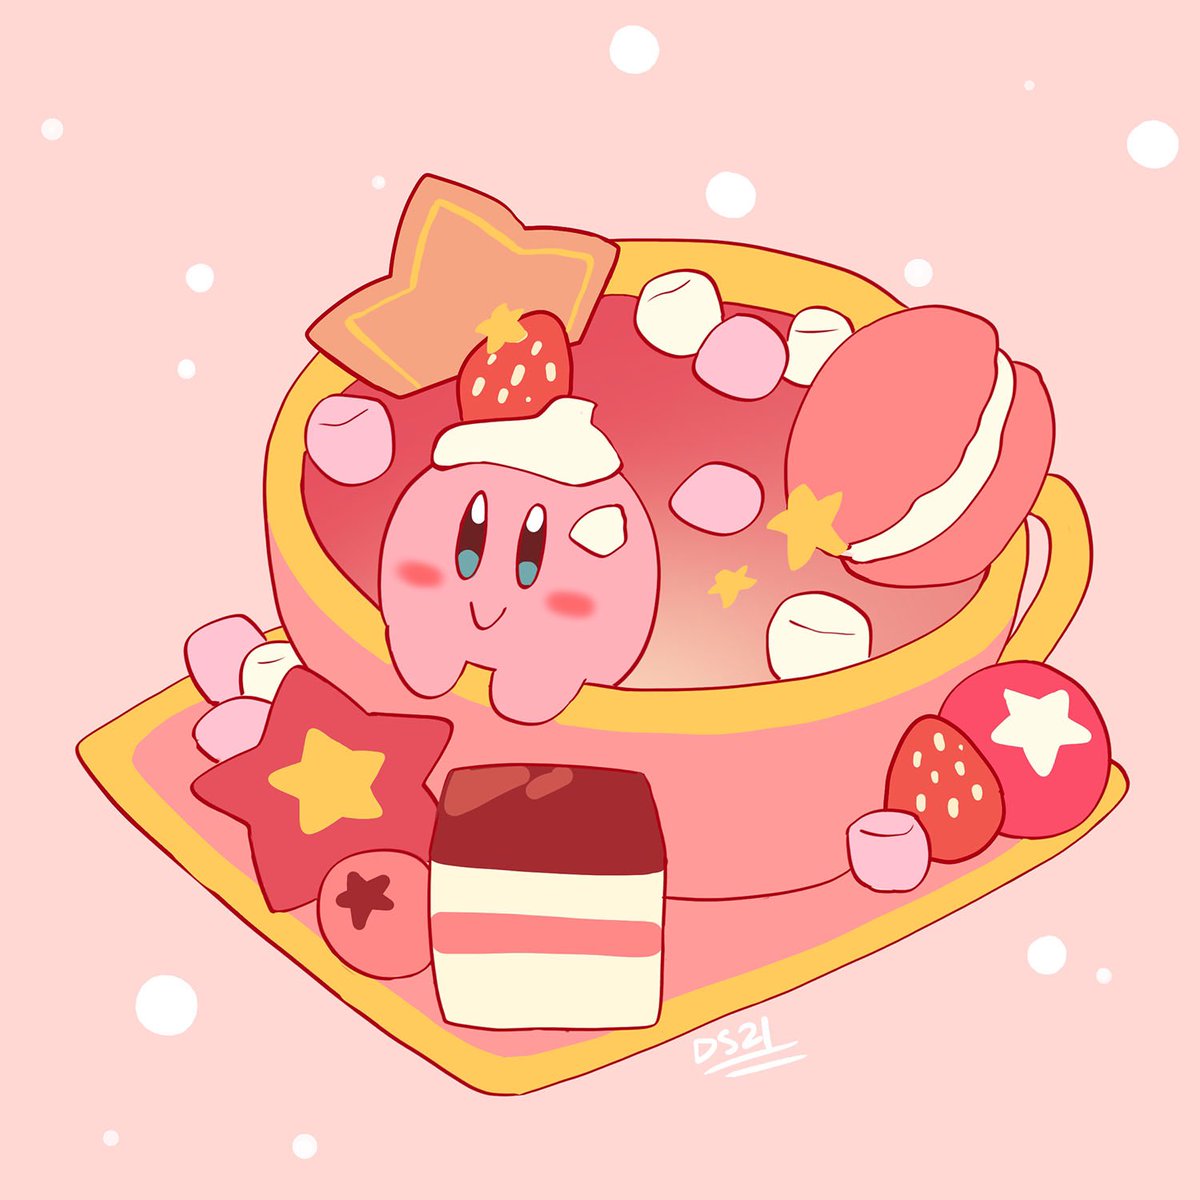 Upcoming merch tomorrow, including a special gold Kirby sticker! :)

They'll be available for my FINAL store update tomorrow at 12pm PST! 